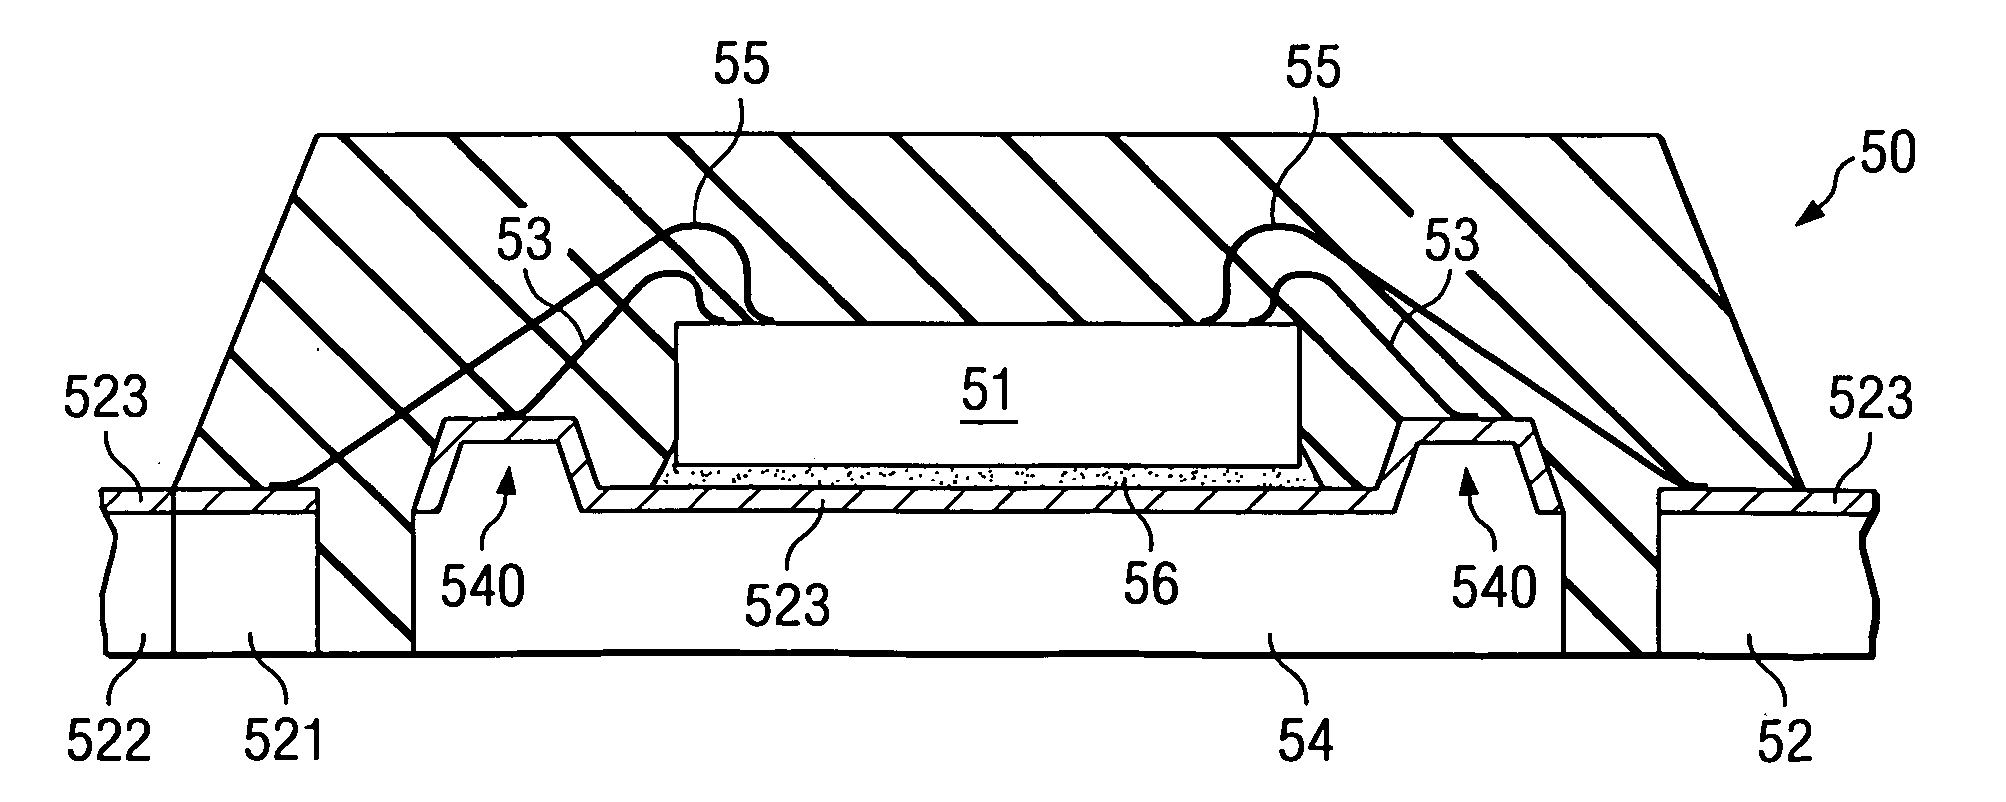 Plastic encapsulated semiconductor device with reliable down bonds